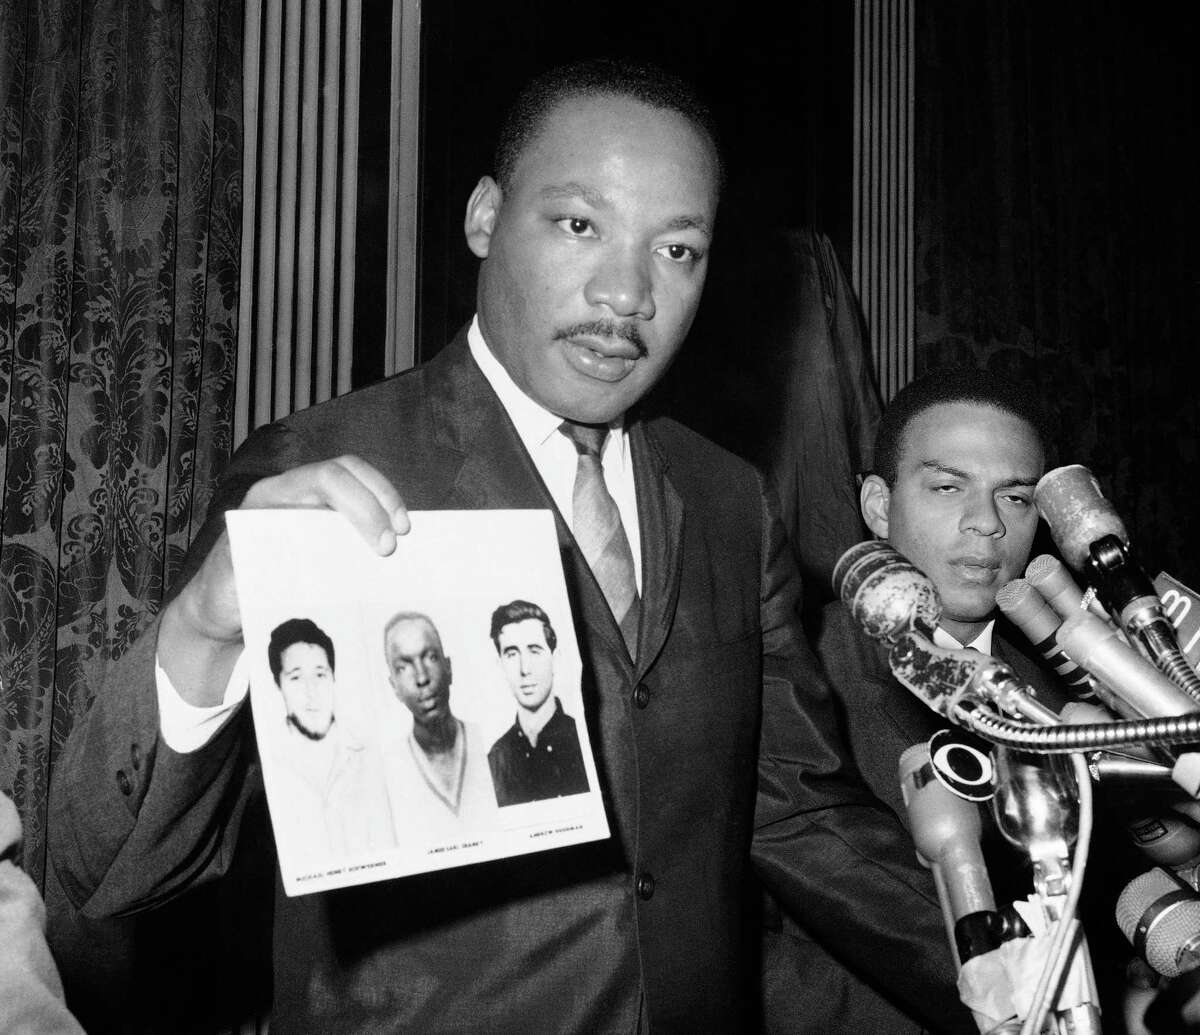 Martin Luther King Jr. holds up the photos of murdered civil rights workers Michael Schwerner, James Chaney, and Andrew Goodman. They died fighting to expand the right to vote. Nearly 60 years later, voting rights are under assault.